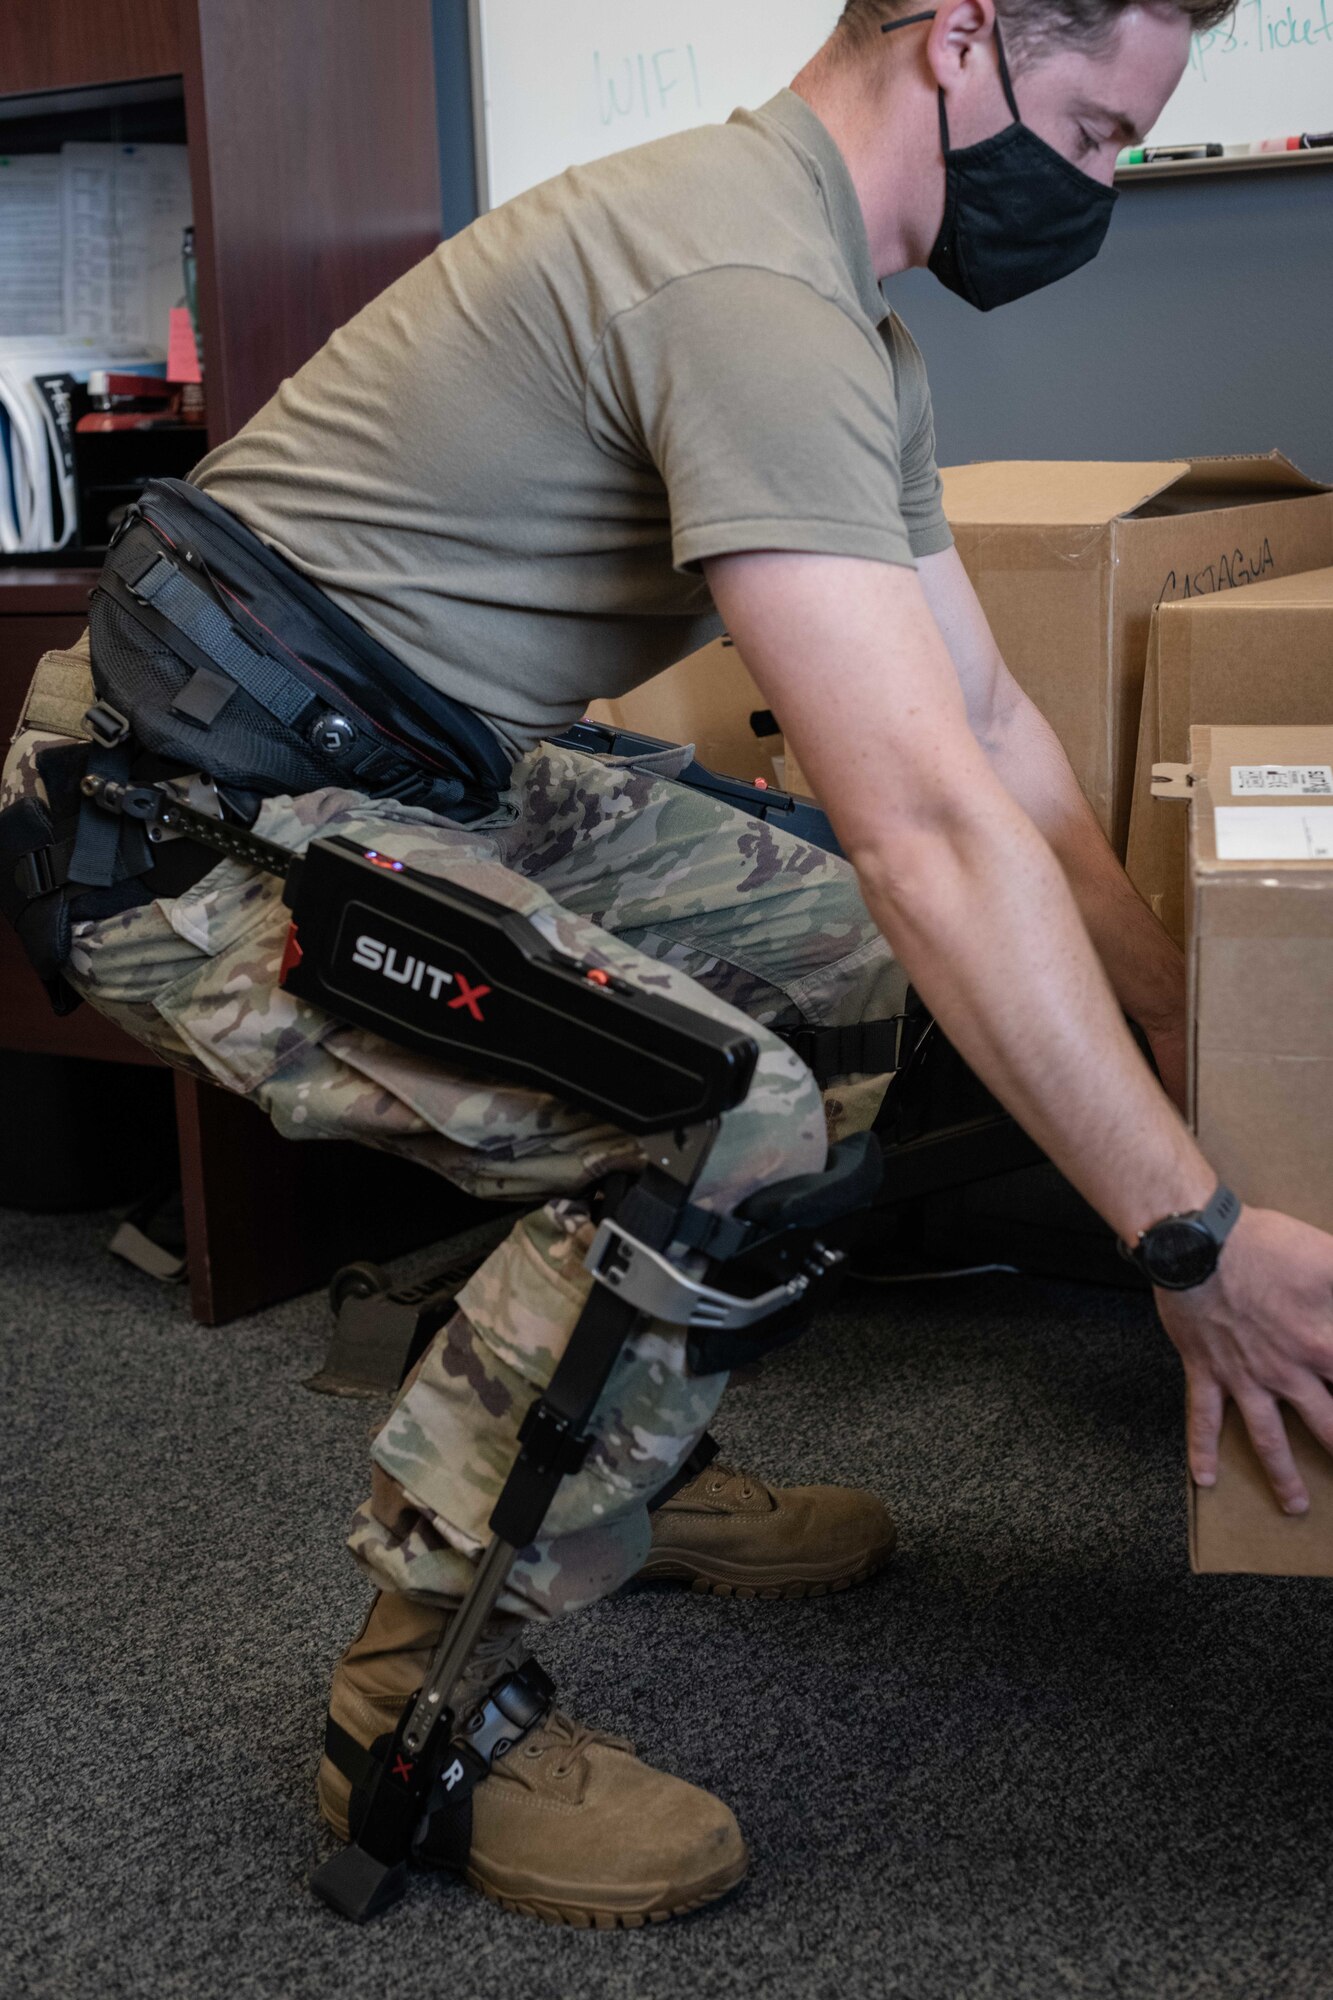 An Airman picks up a cardboard box while wearing a suit strapped to his hips, legs and feet.